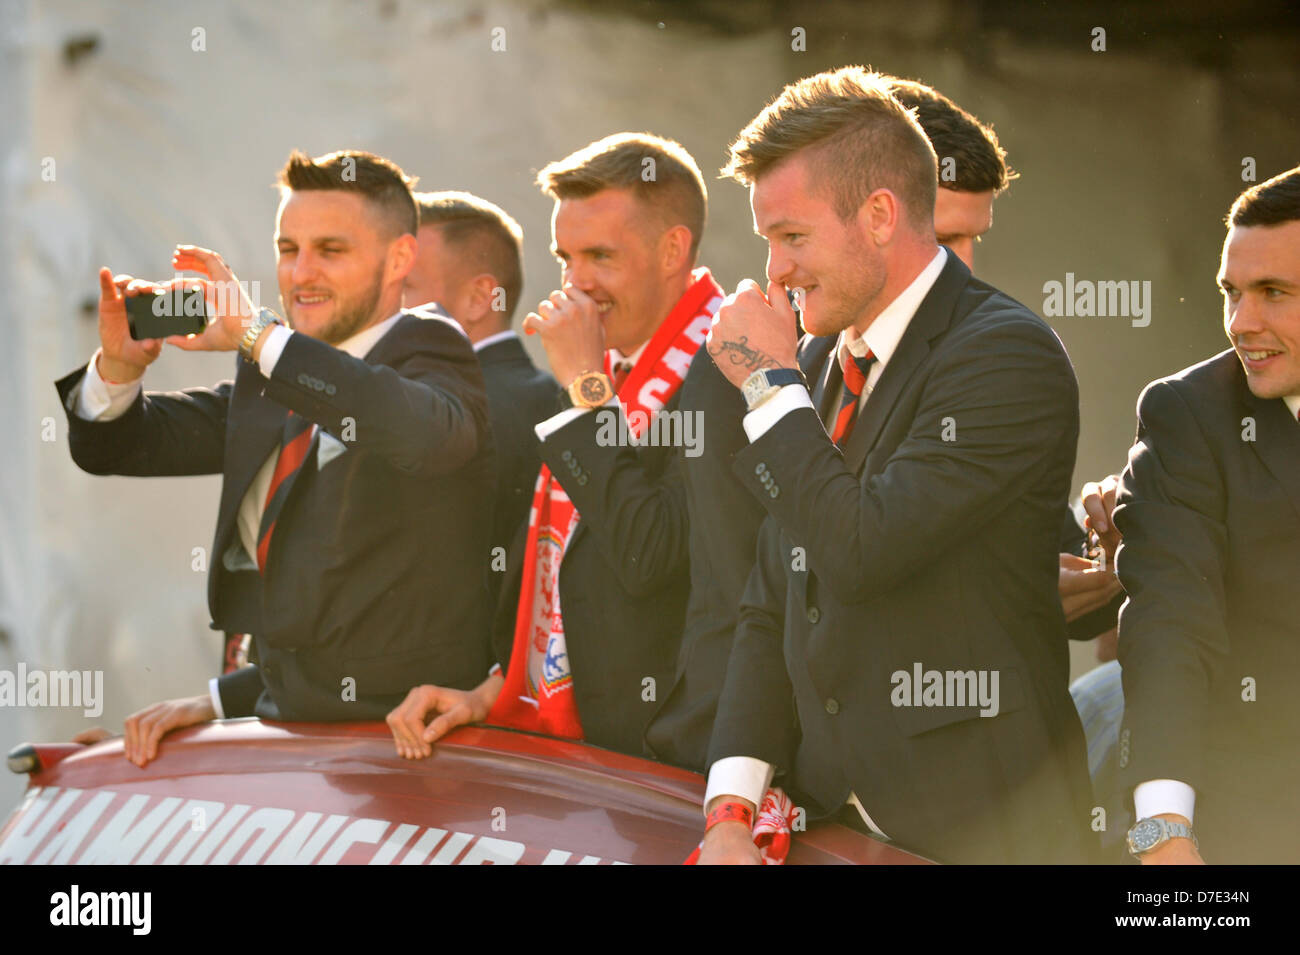 Cardiff, UK. 5th May 2013. Cardiff City FC players show off their Championship trophy to thousands of fans gathered to show their support. The team were paraded through the city in an open top bus after winning the Championship and being promoted to the Premier League. Credit: Polly Thomas/Alamy Live News Stock Photo